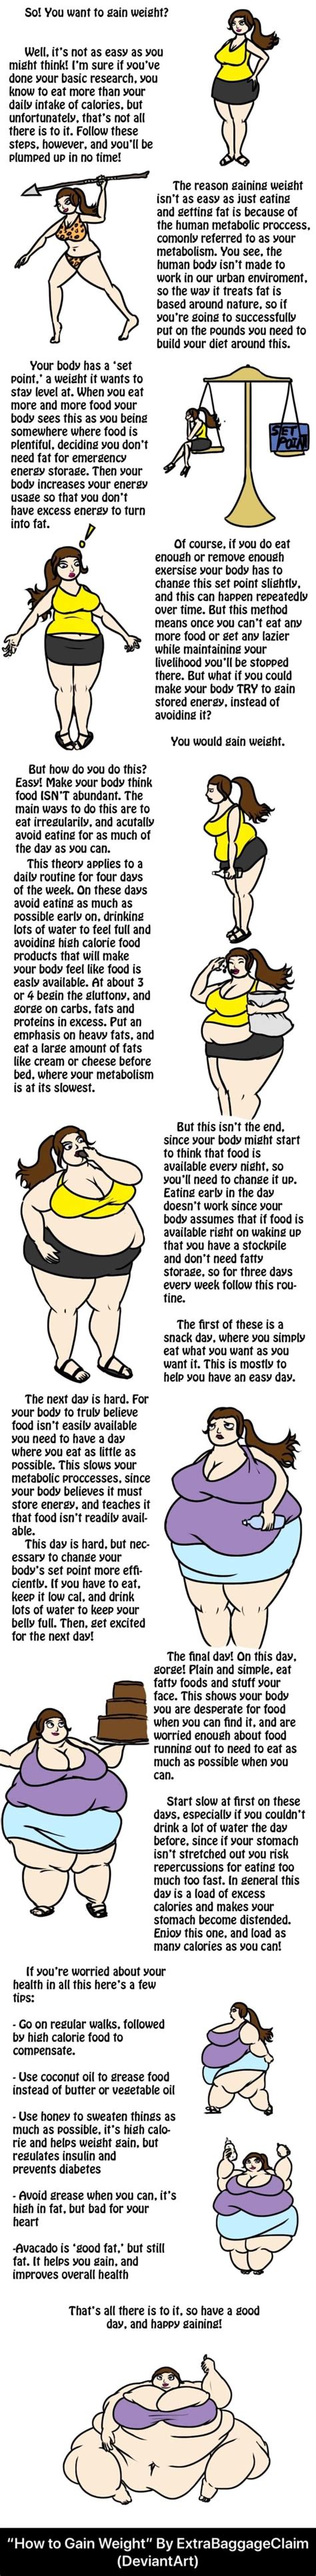 So You Want To Gain Weight Well Its Not As Easy As You